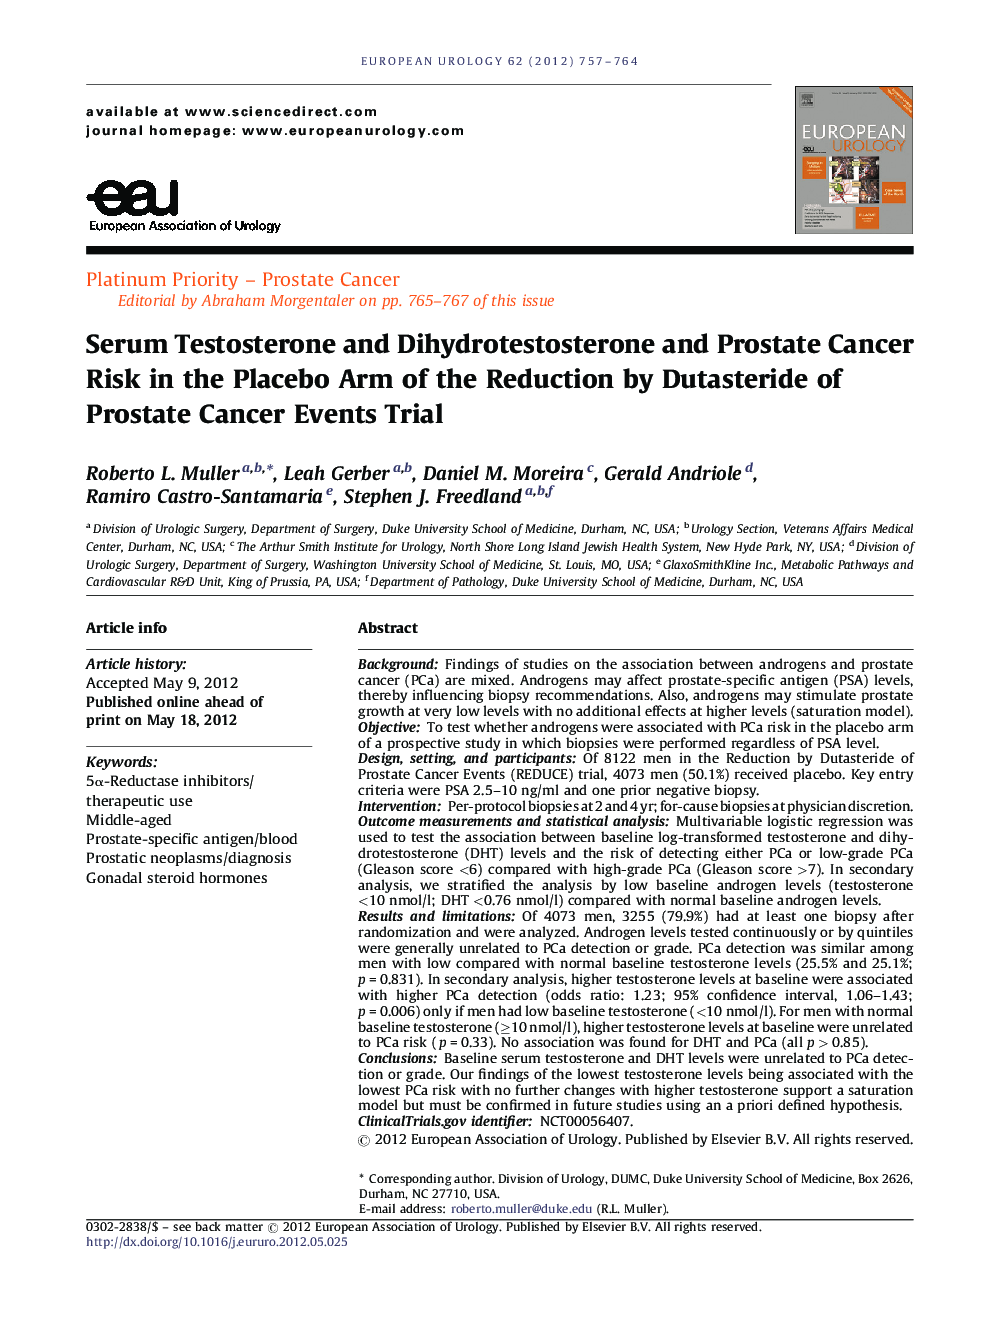 Serum Testosterone and Dihydrotestosterone and Prostate Cancer Risk in the Placebo Arm of the Reduction by Dutasteride of Prostate Cancer Events Trial